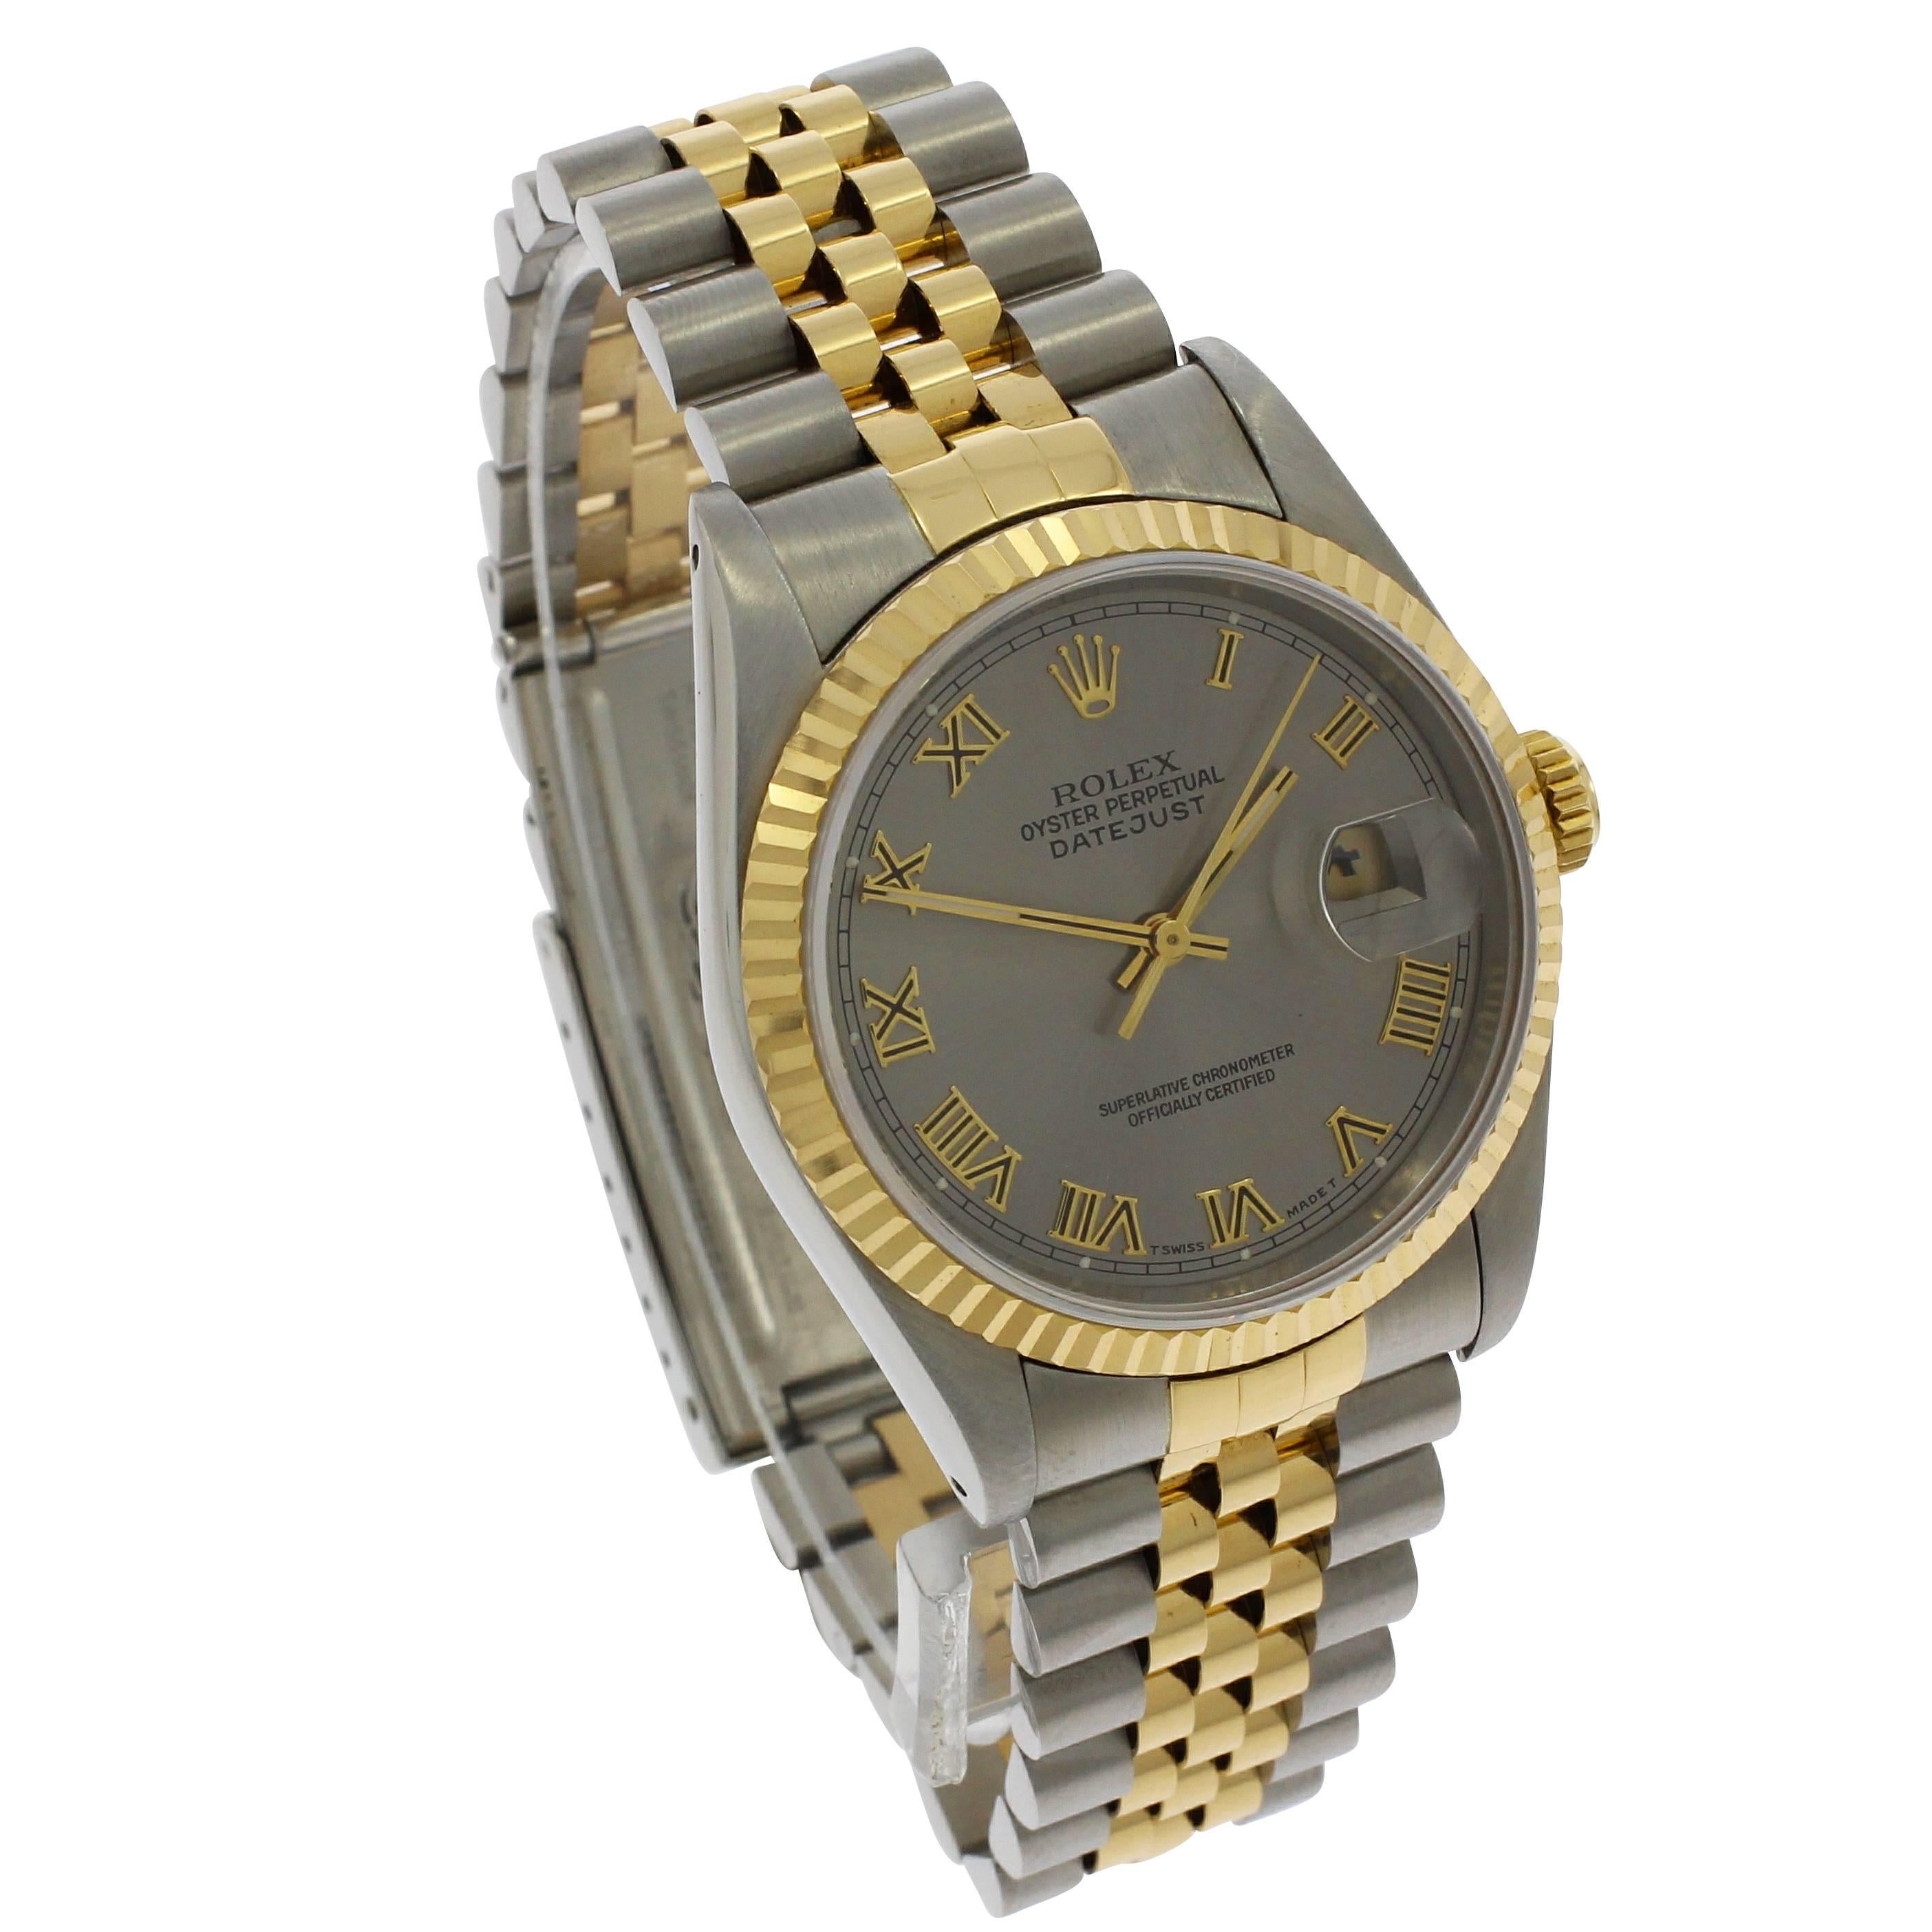 Rolex Yellow Gold Stainless Steel Datejust Wristwatch Ref 16233, 1990 For Sale 11